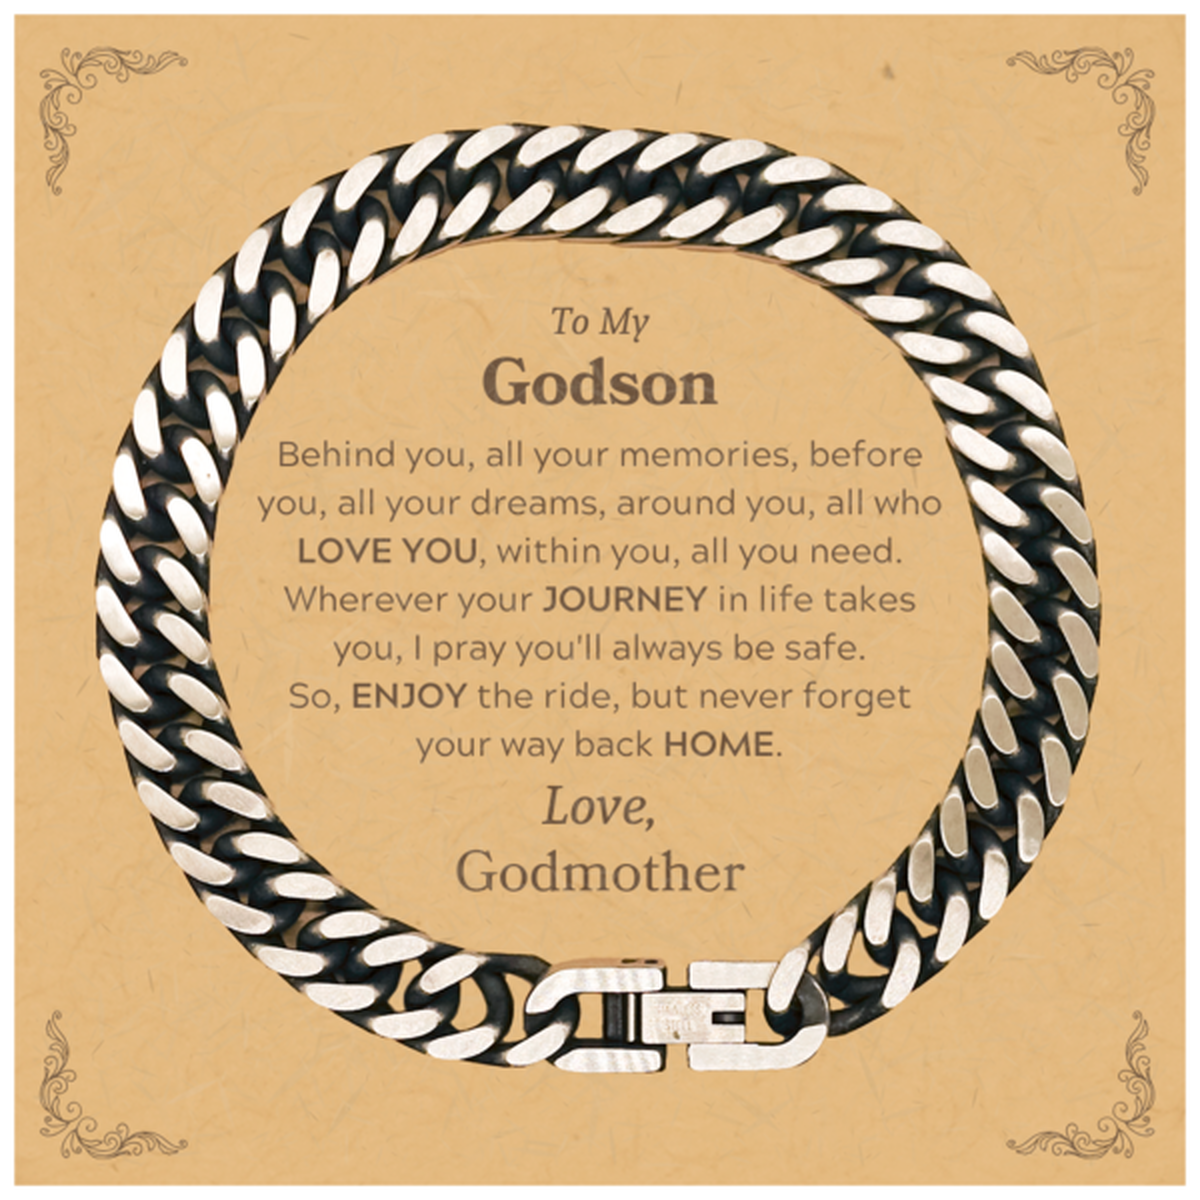 To My Godson Graduation Gifts from Godmother, Godson Cuban Link Chain Bracelet Christmas Birthday Gifts for Godson Behind you, all your memories, before you, all your dreams. Love, Godmother